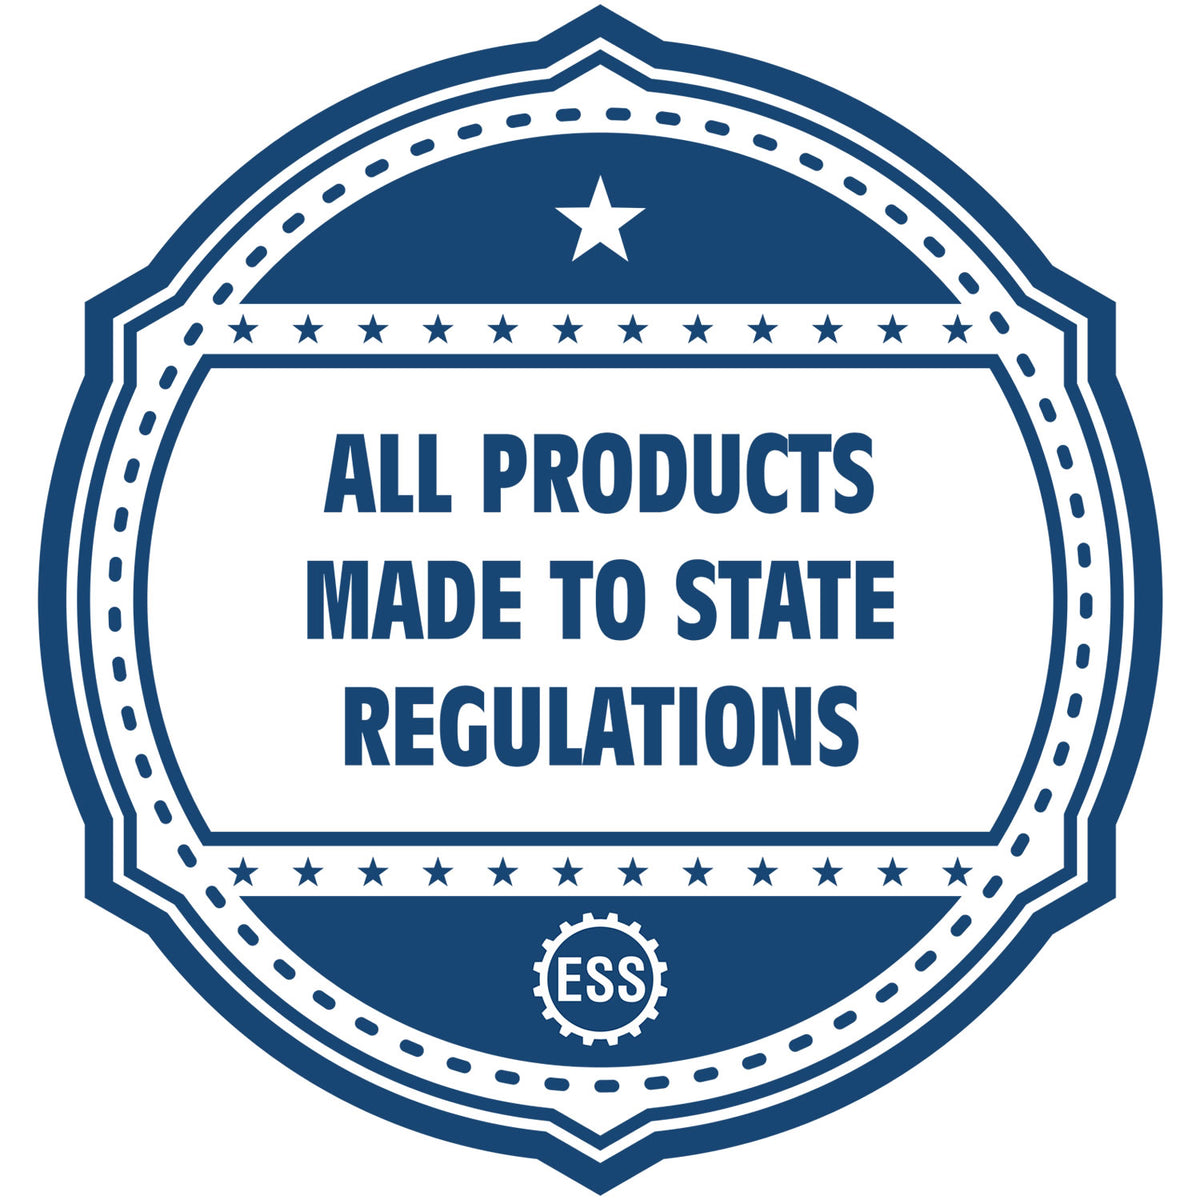 An icon or badge element for the Handheld Michigan Land Surveyor Seal showing that this product is made in compliance with state regulations.